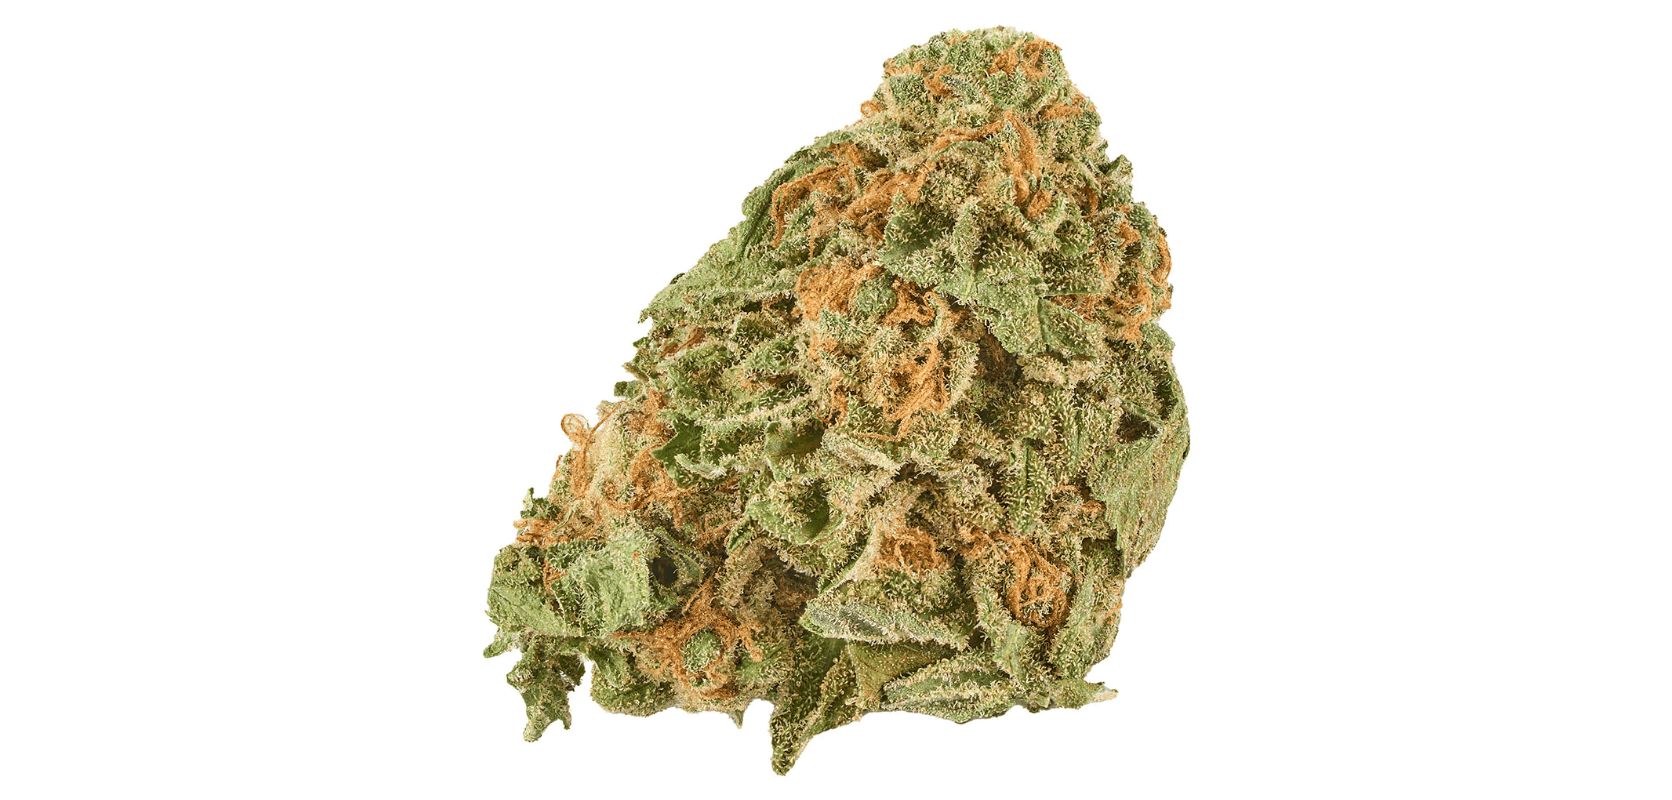 Grand Daddy Purple's potential to induce sleep is one of its most notable effects. 